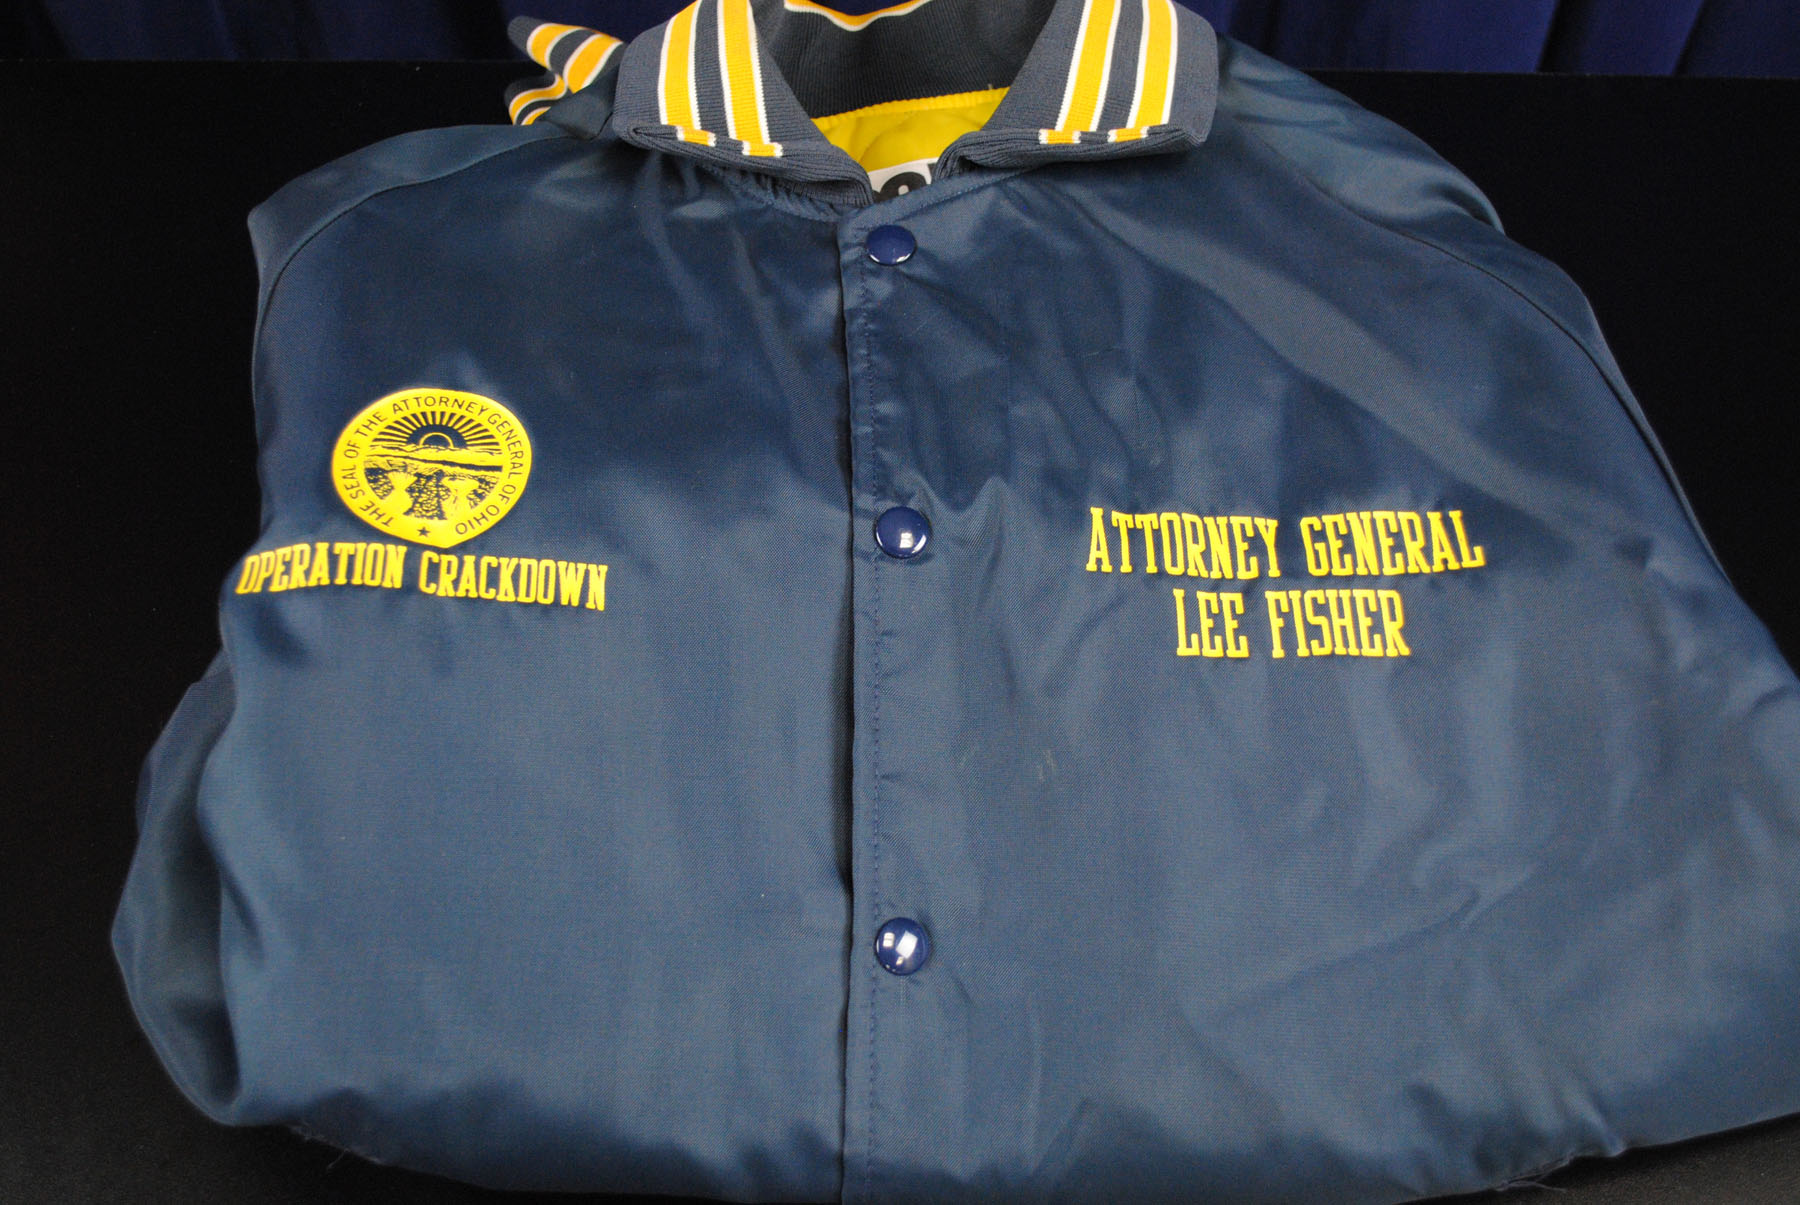 Attorney General Lee Fisher's Operation Crackdown Jacket  